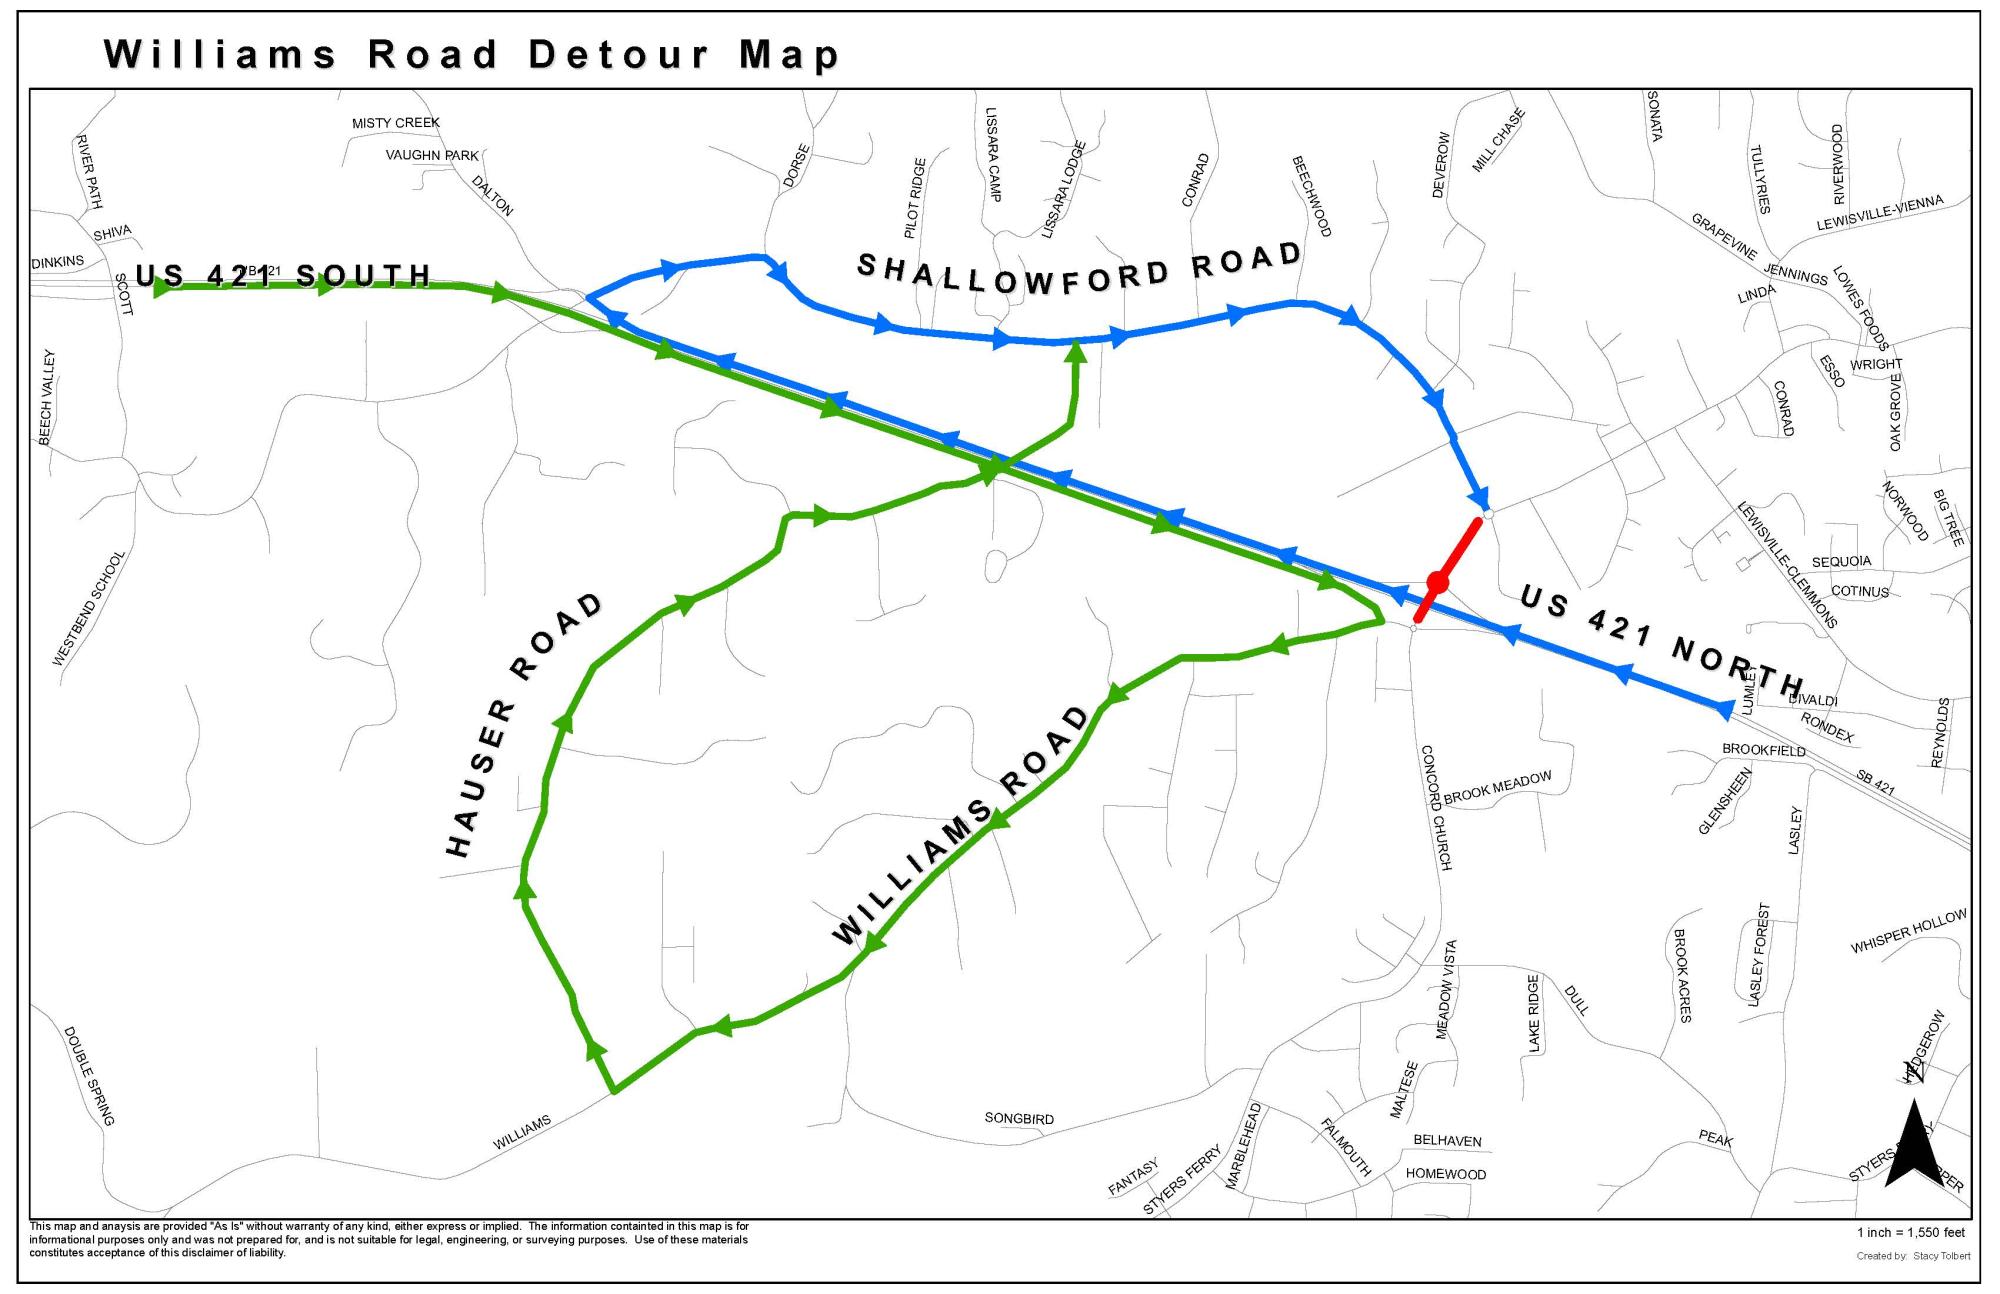 Map of temporary road closure and detour due to road work